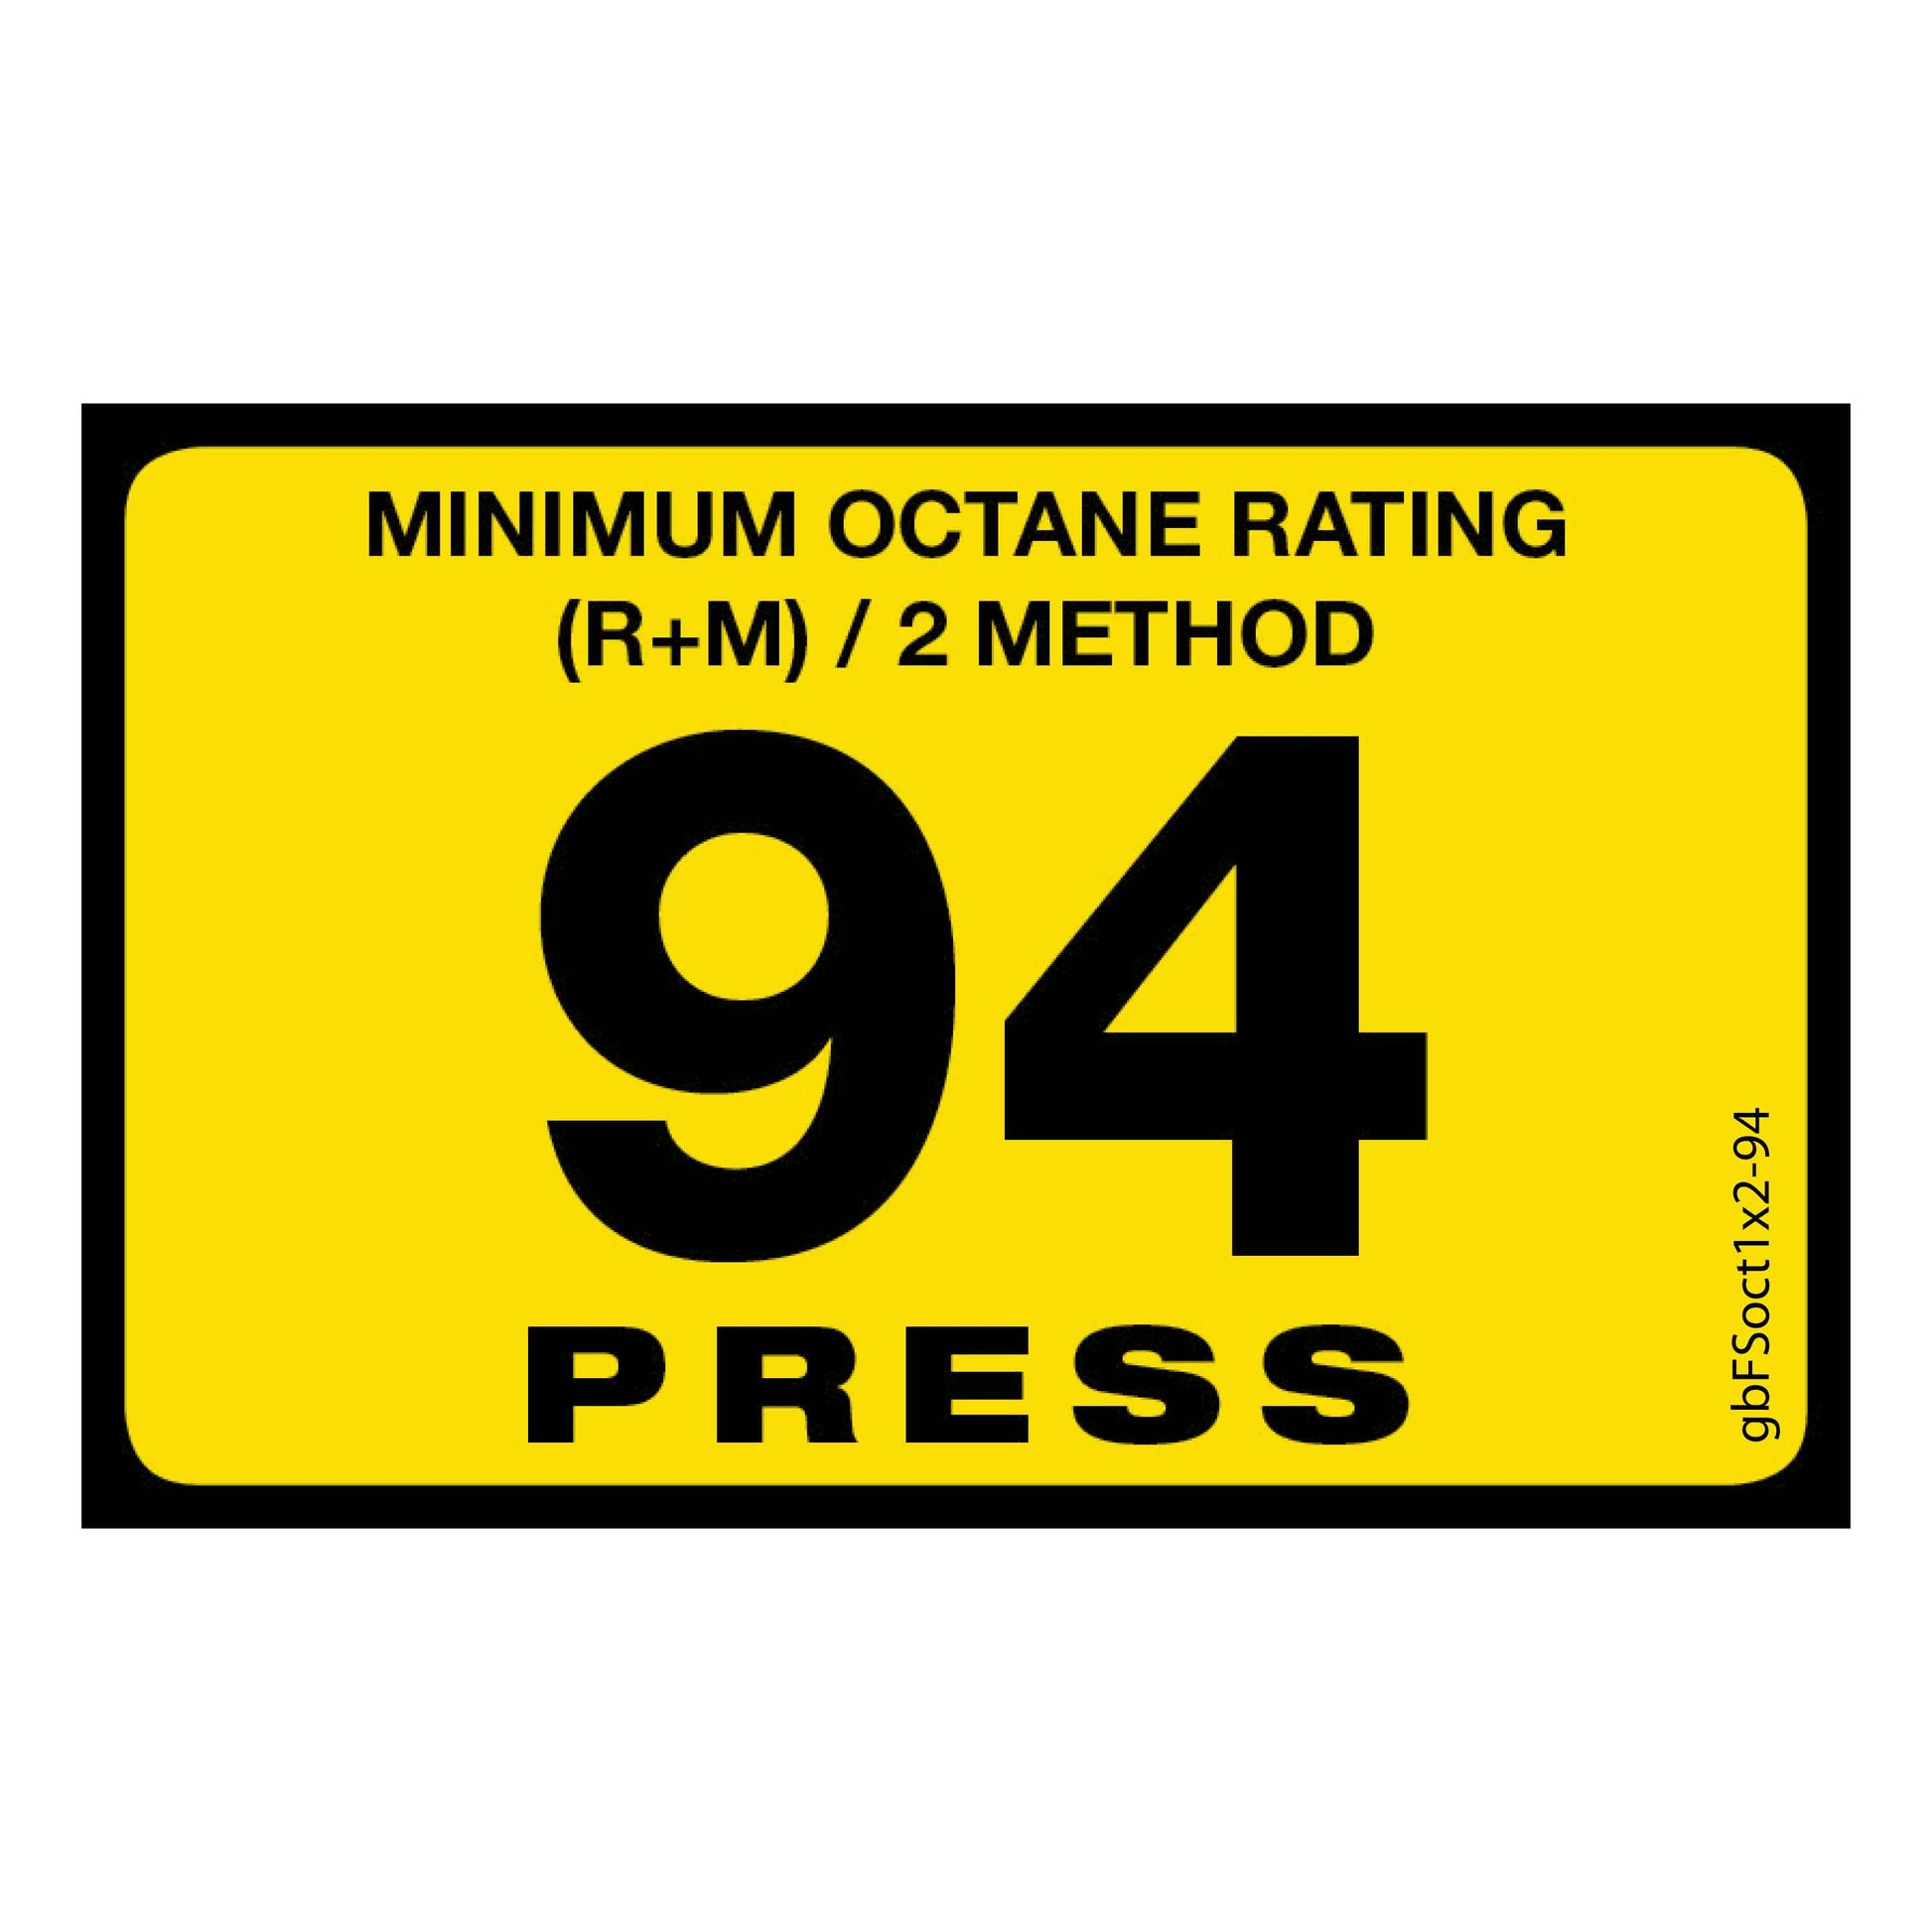 94 Press Octane Rating Decal. 1 inch by 2 inches in size. 